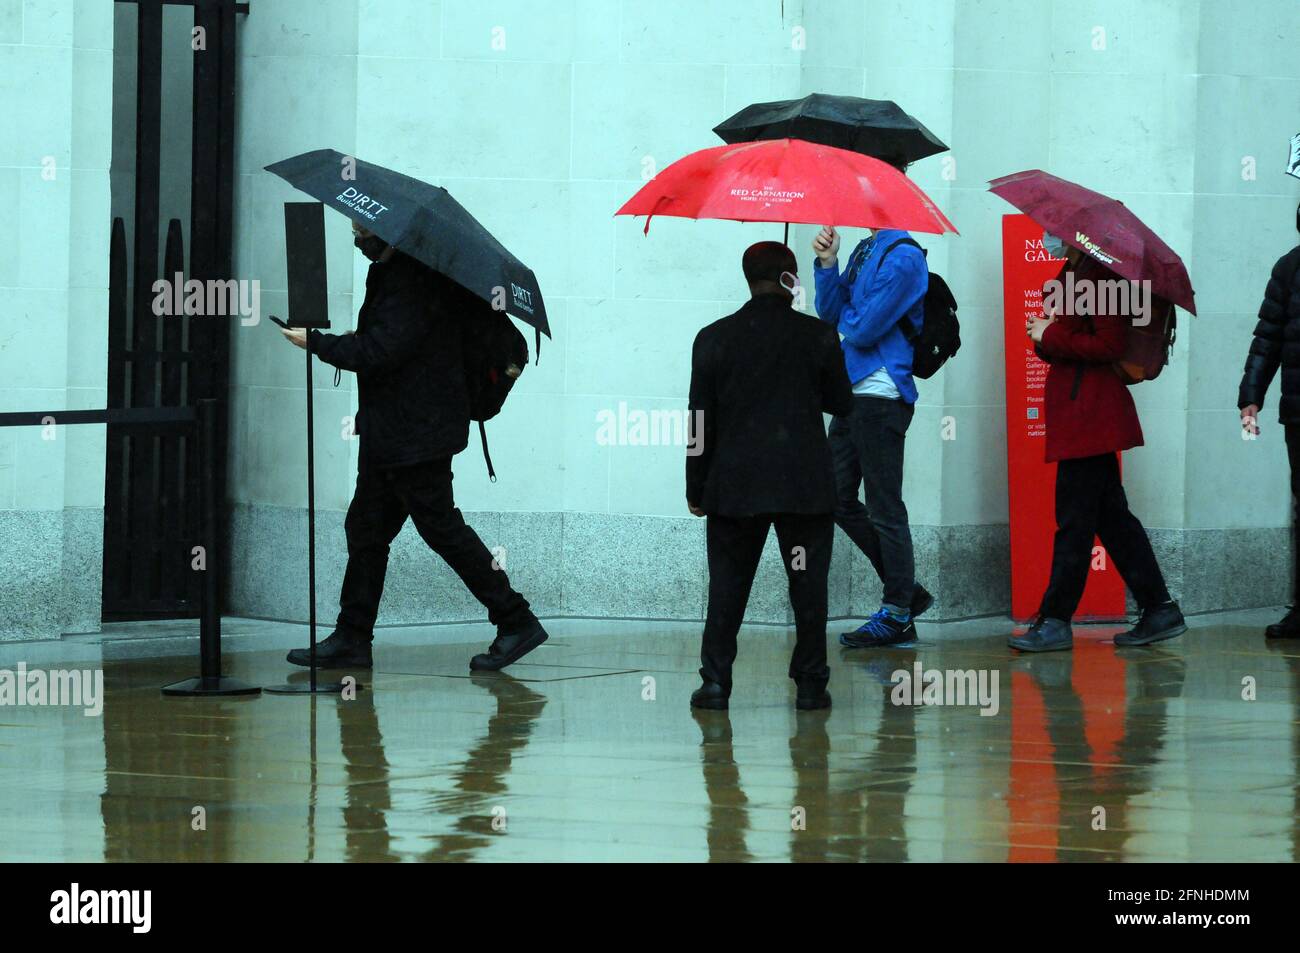 London, UK. 17th May, 2021. London re-opens after lockdown. Queue to enter National Gallery on Trafalgar Square. Credit: JOHNNY ARMSTEAD/Alamy Live News Stock Photo